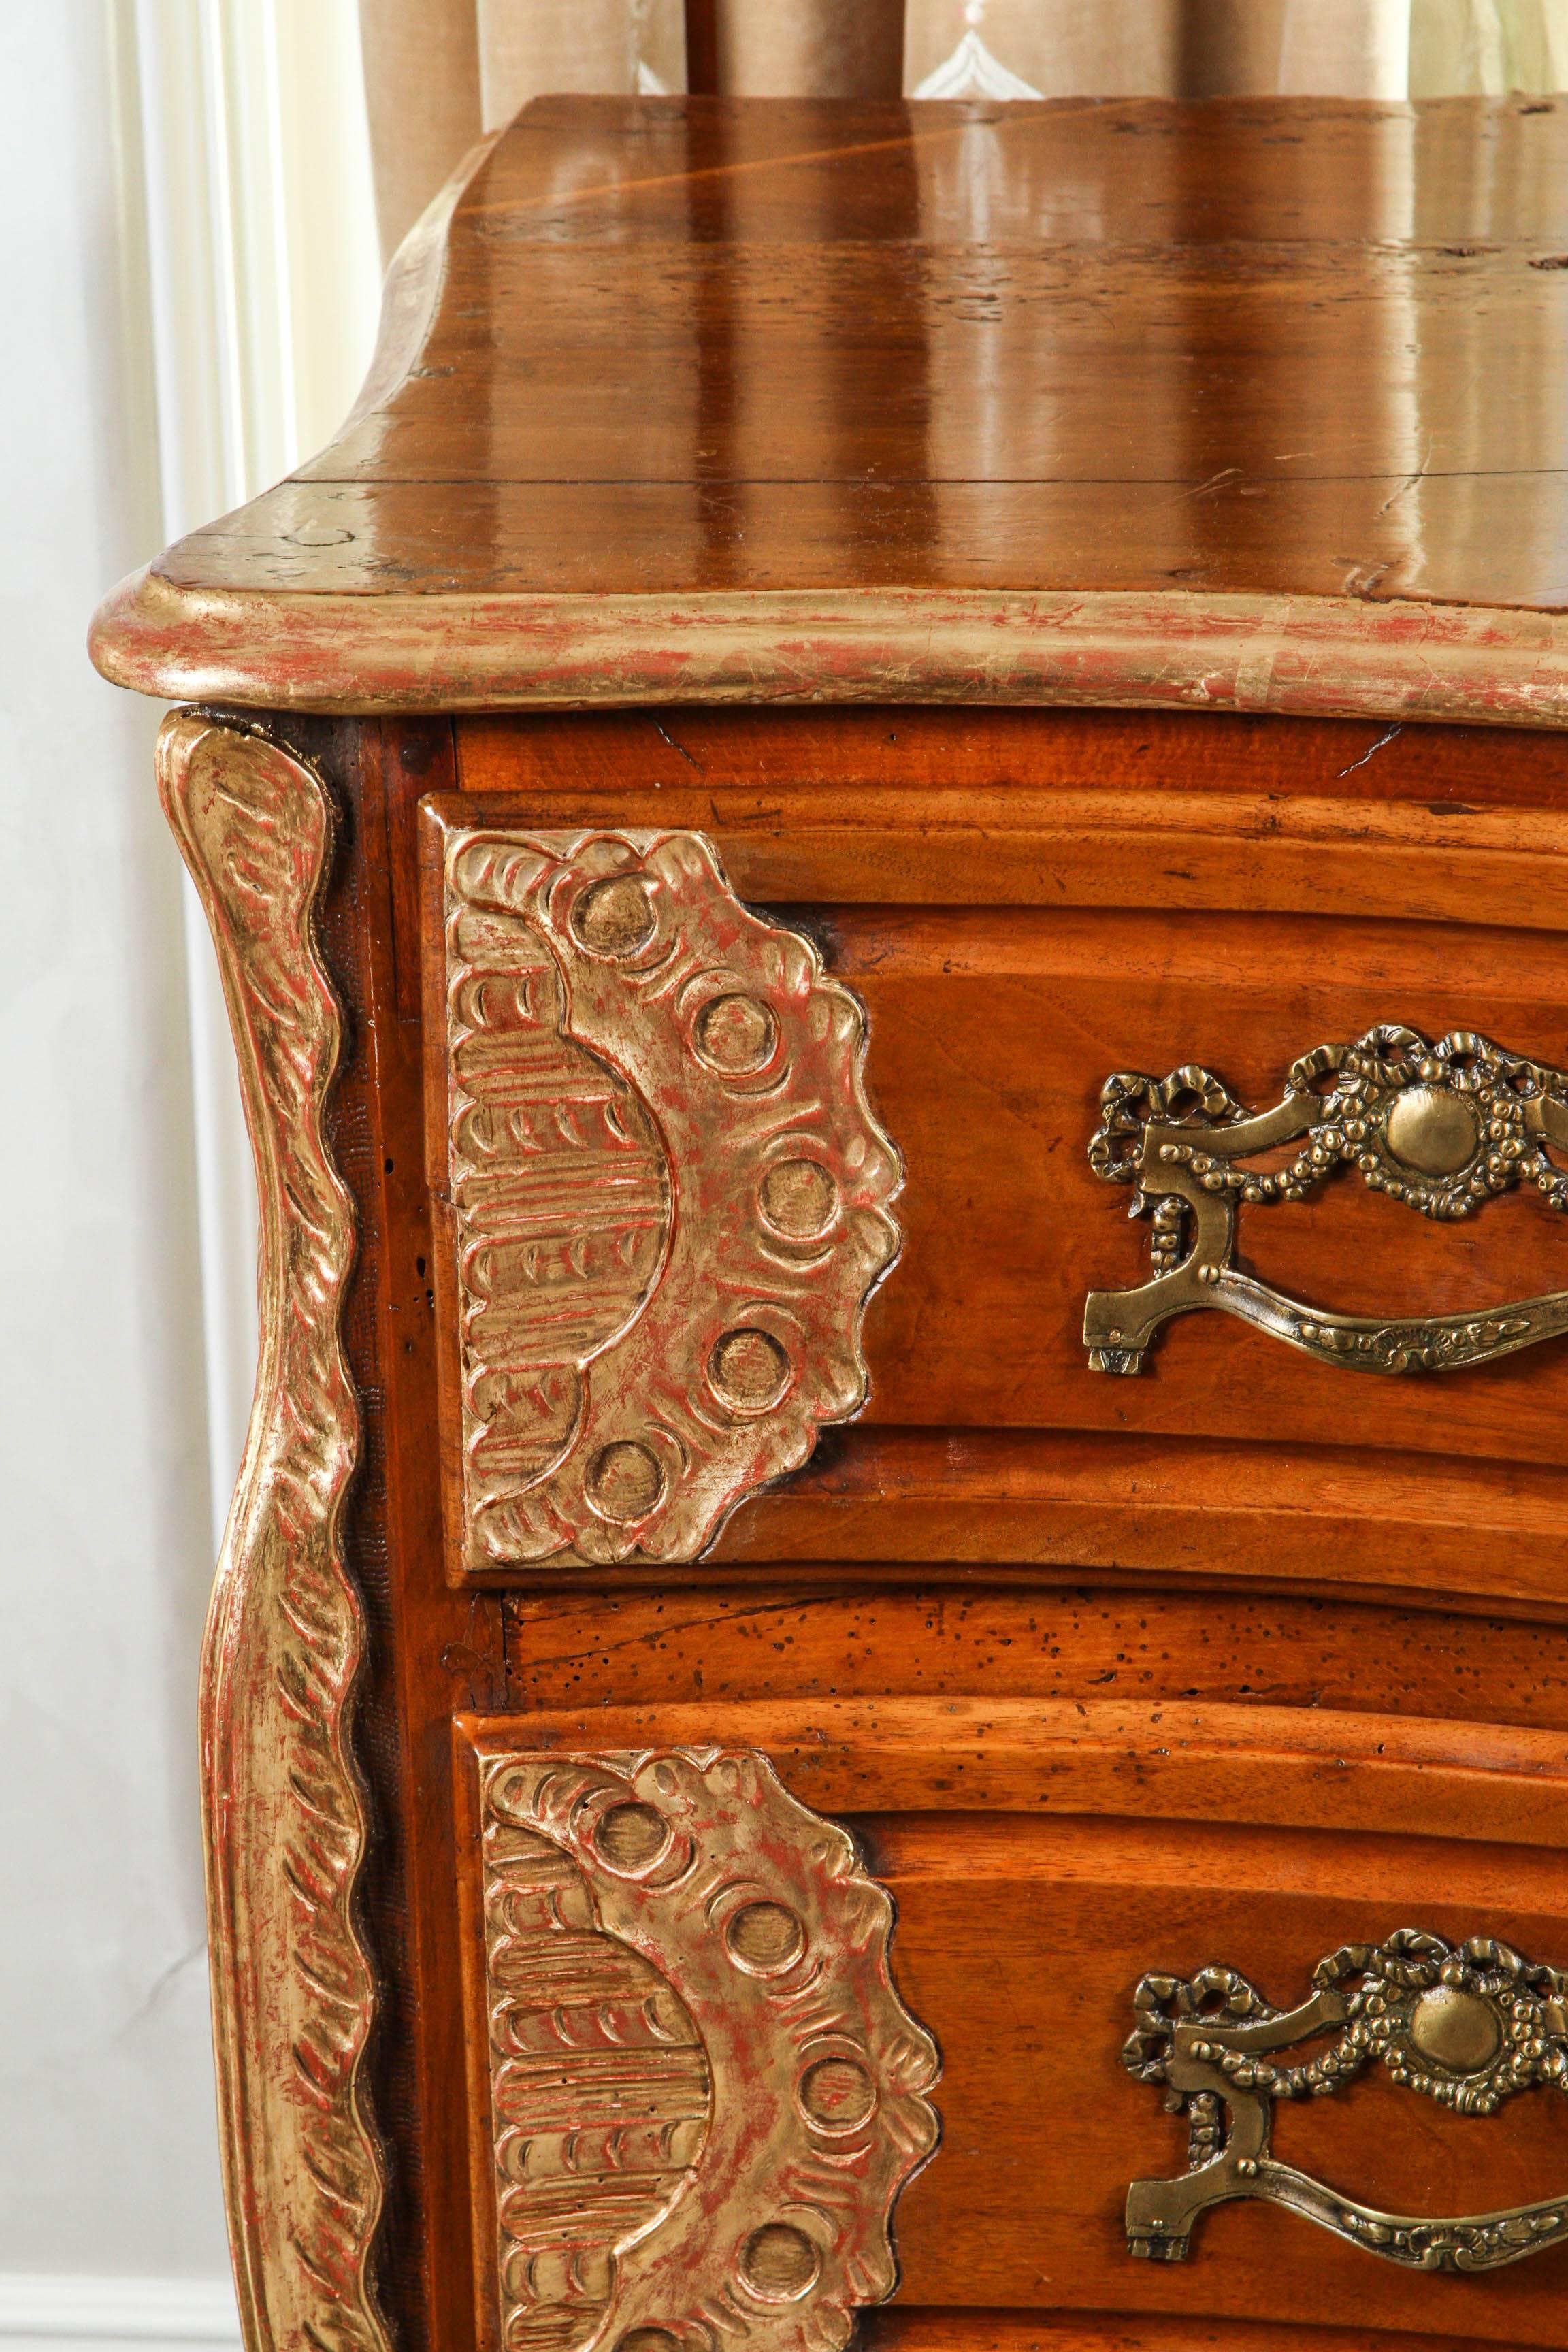 18th century Lyonaise three drawer walnut commode with carved giltwood detail and bronze drawer pulls. Both sides of this piece have two panelled side profiles. From the connoisseur collection in Los Angeles, California.
 